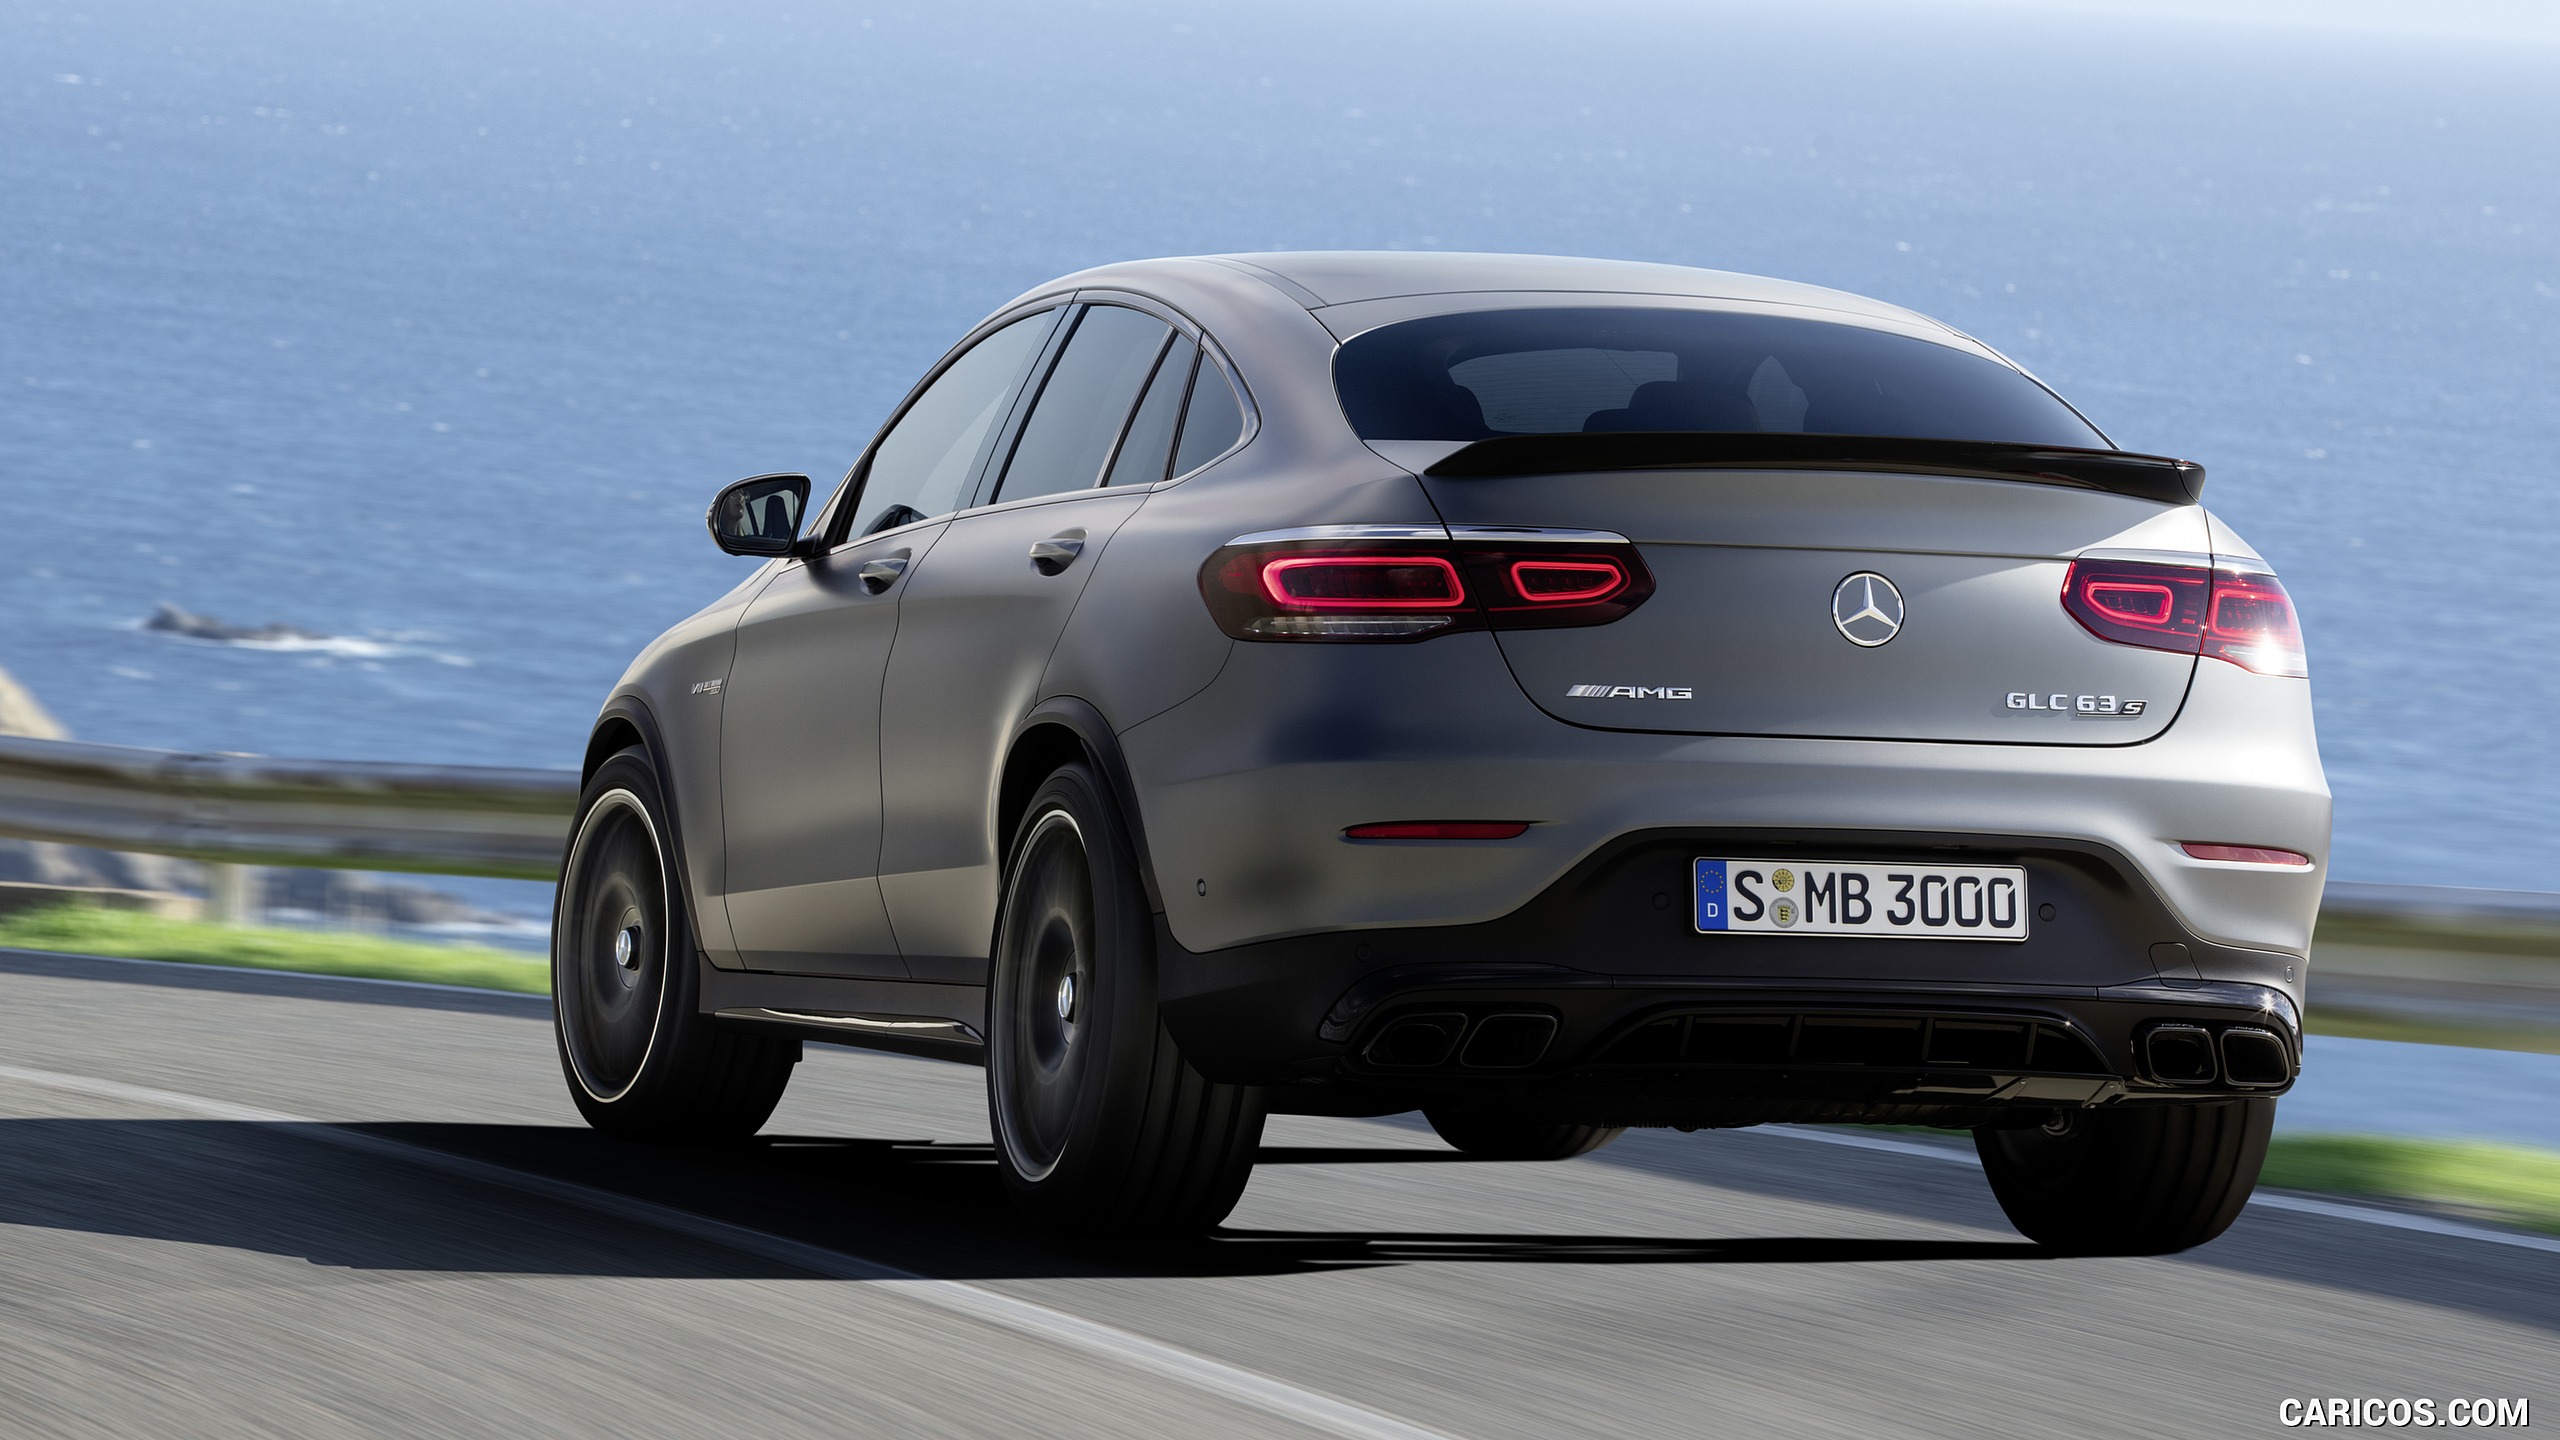 2020 Mercedes-AMG GLC 63 S 4MATIC+ Coupe - Rear, #6 of 102